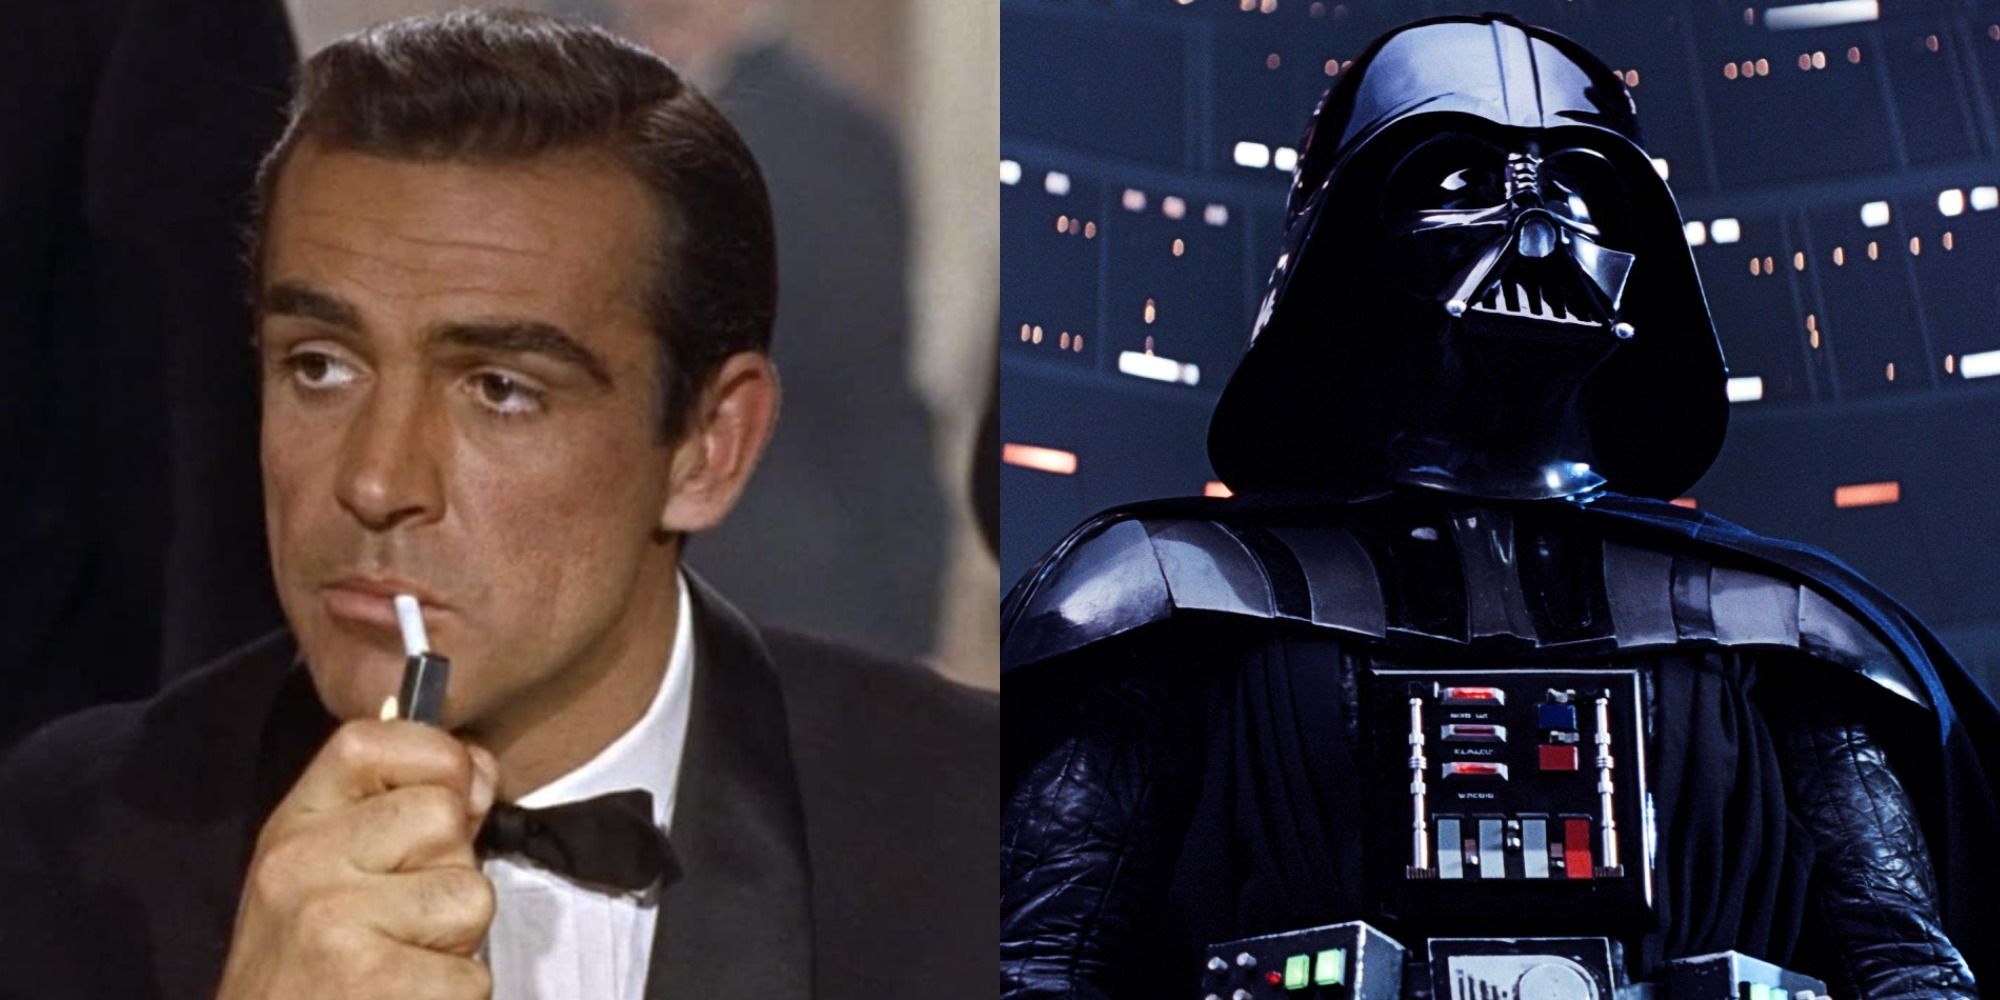 Split image of James Bond in Dr. No and Darth Vader in The Empire Strikes Back